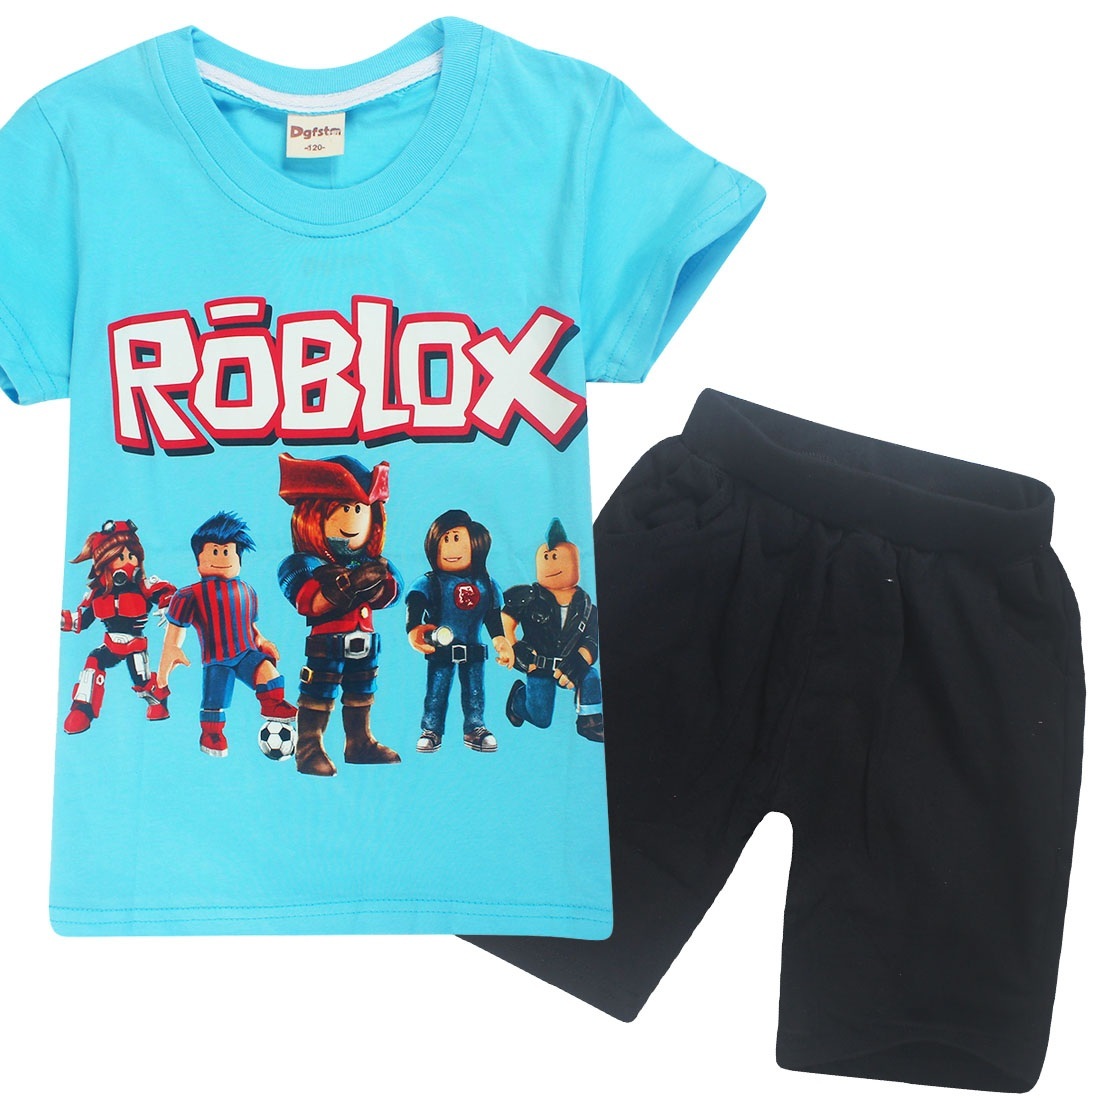 Roblox Theme New Arrival Green Kids T Shirt And 50 Similar Items - roblox autism shirt